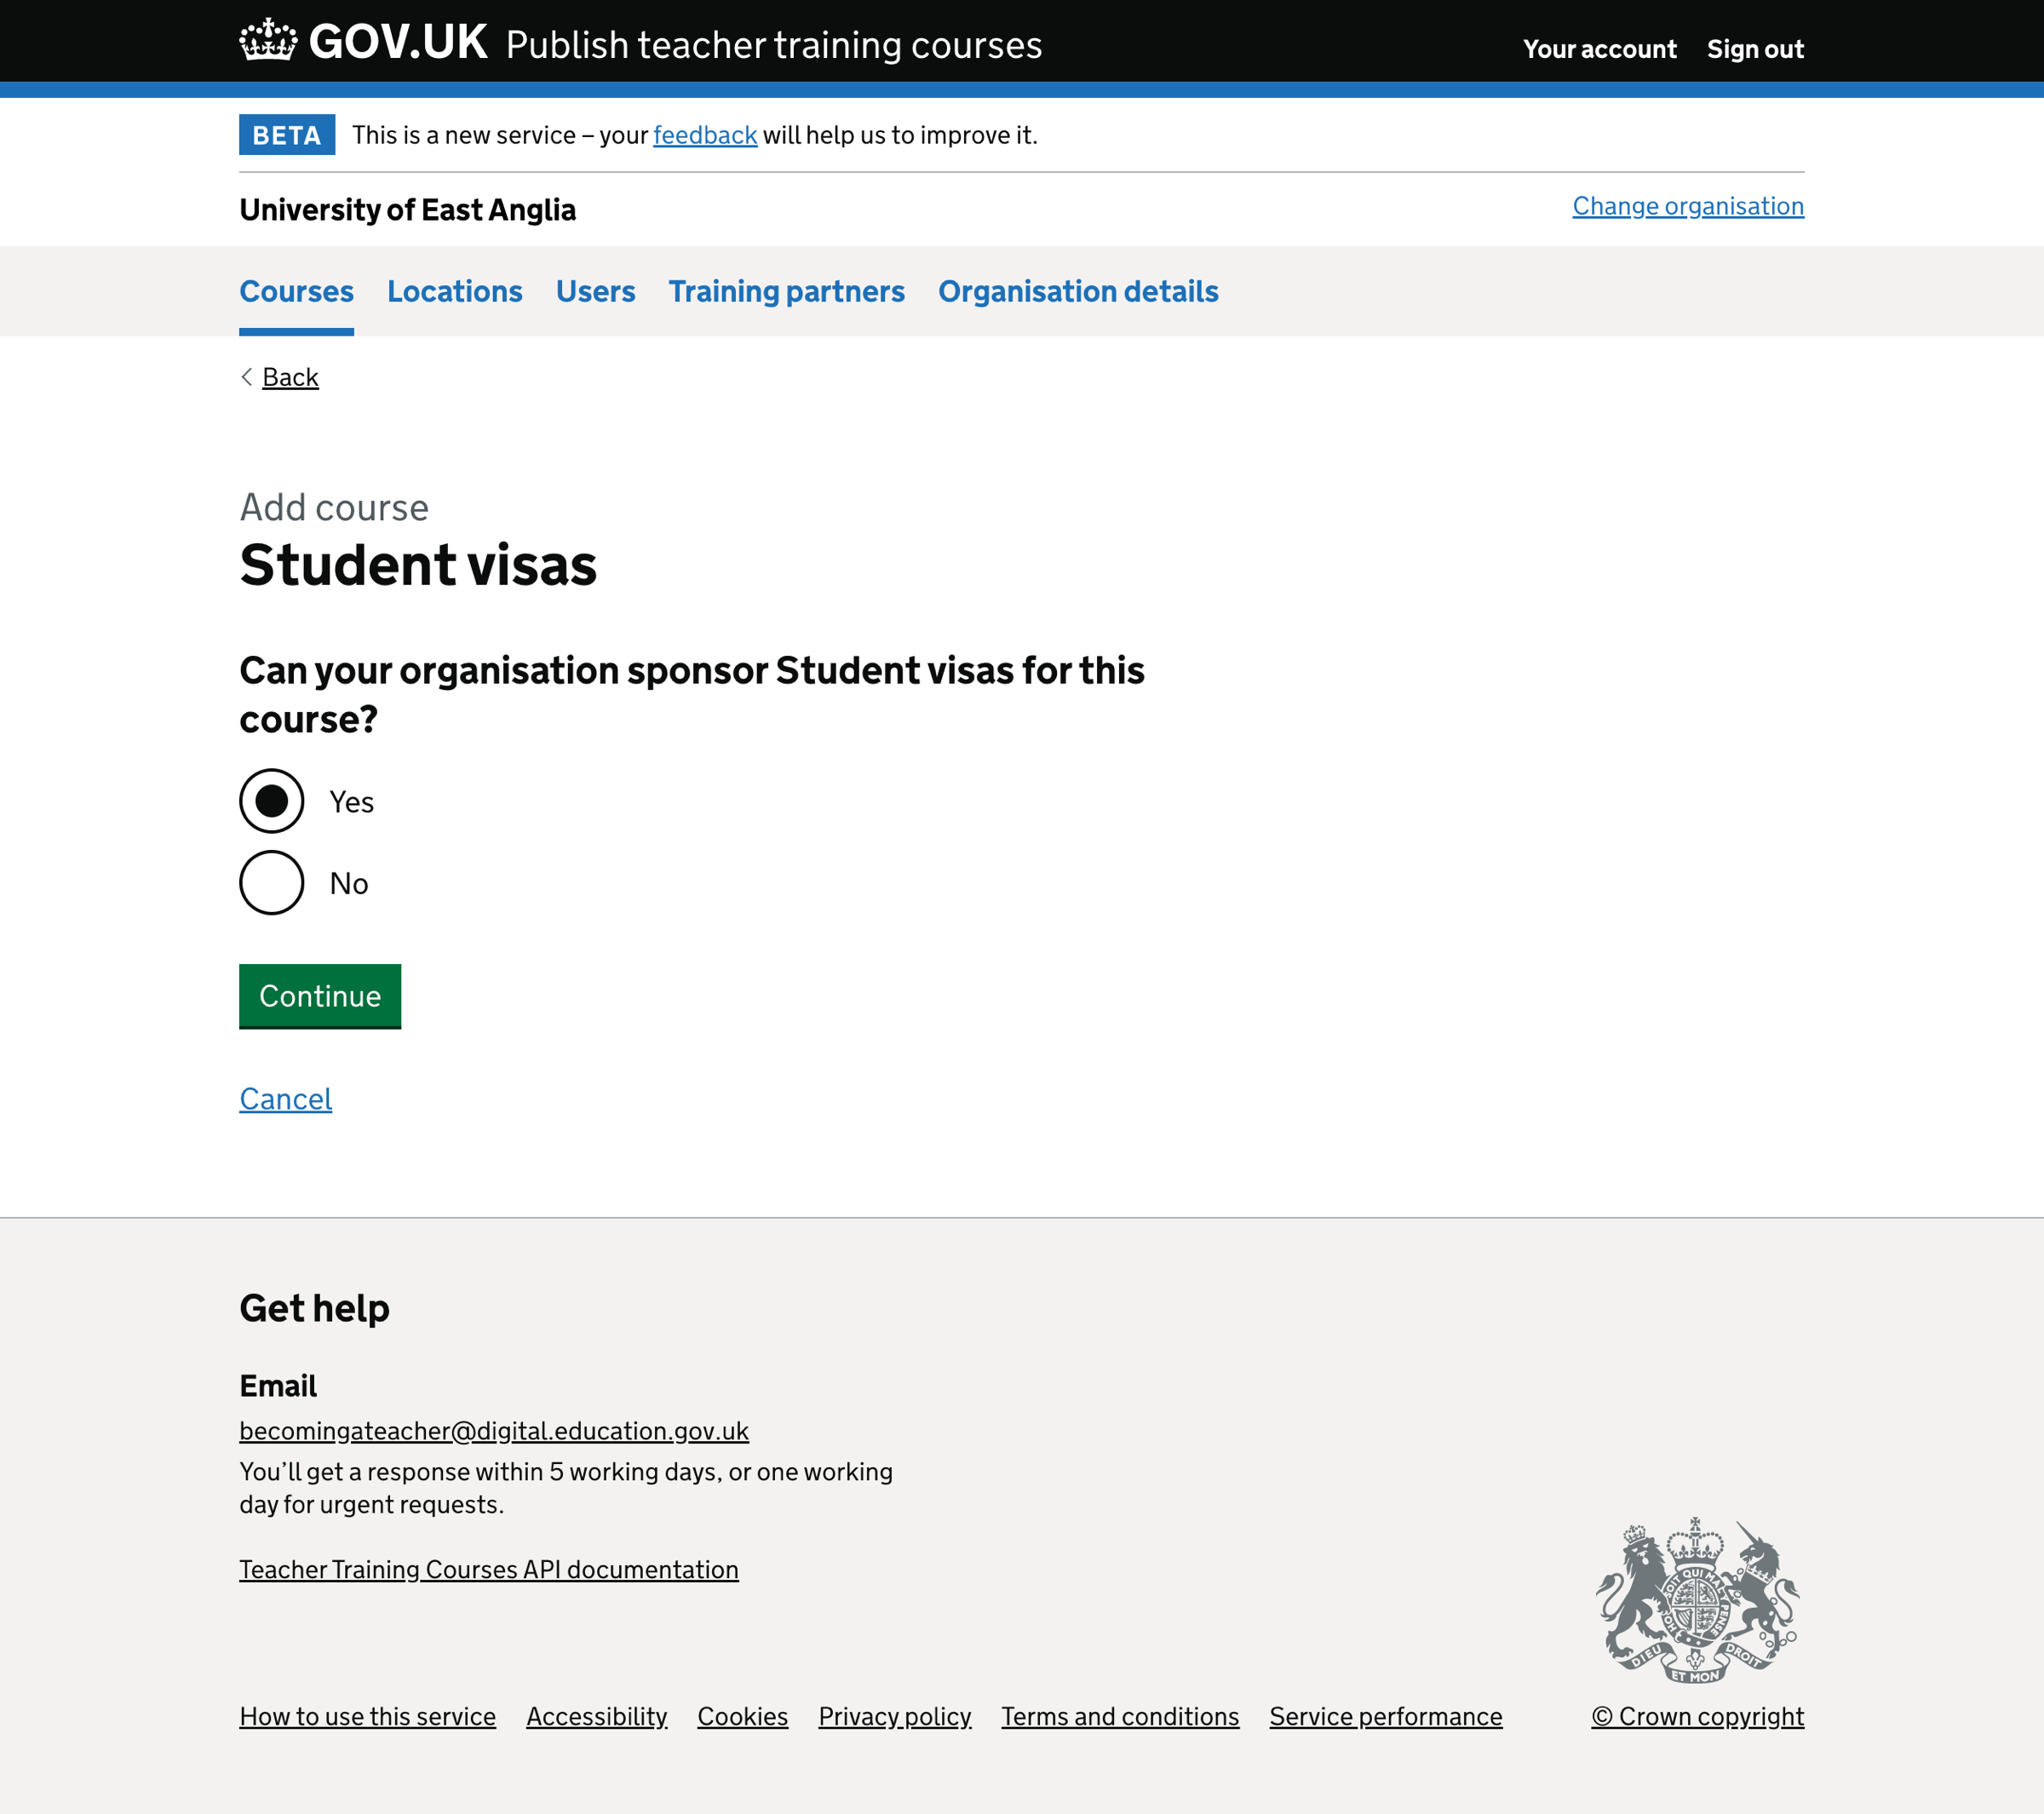 Screenshot of Add course - accredited body - Student visas